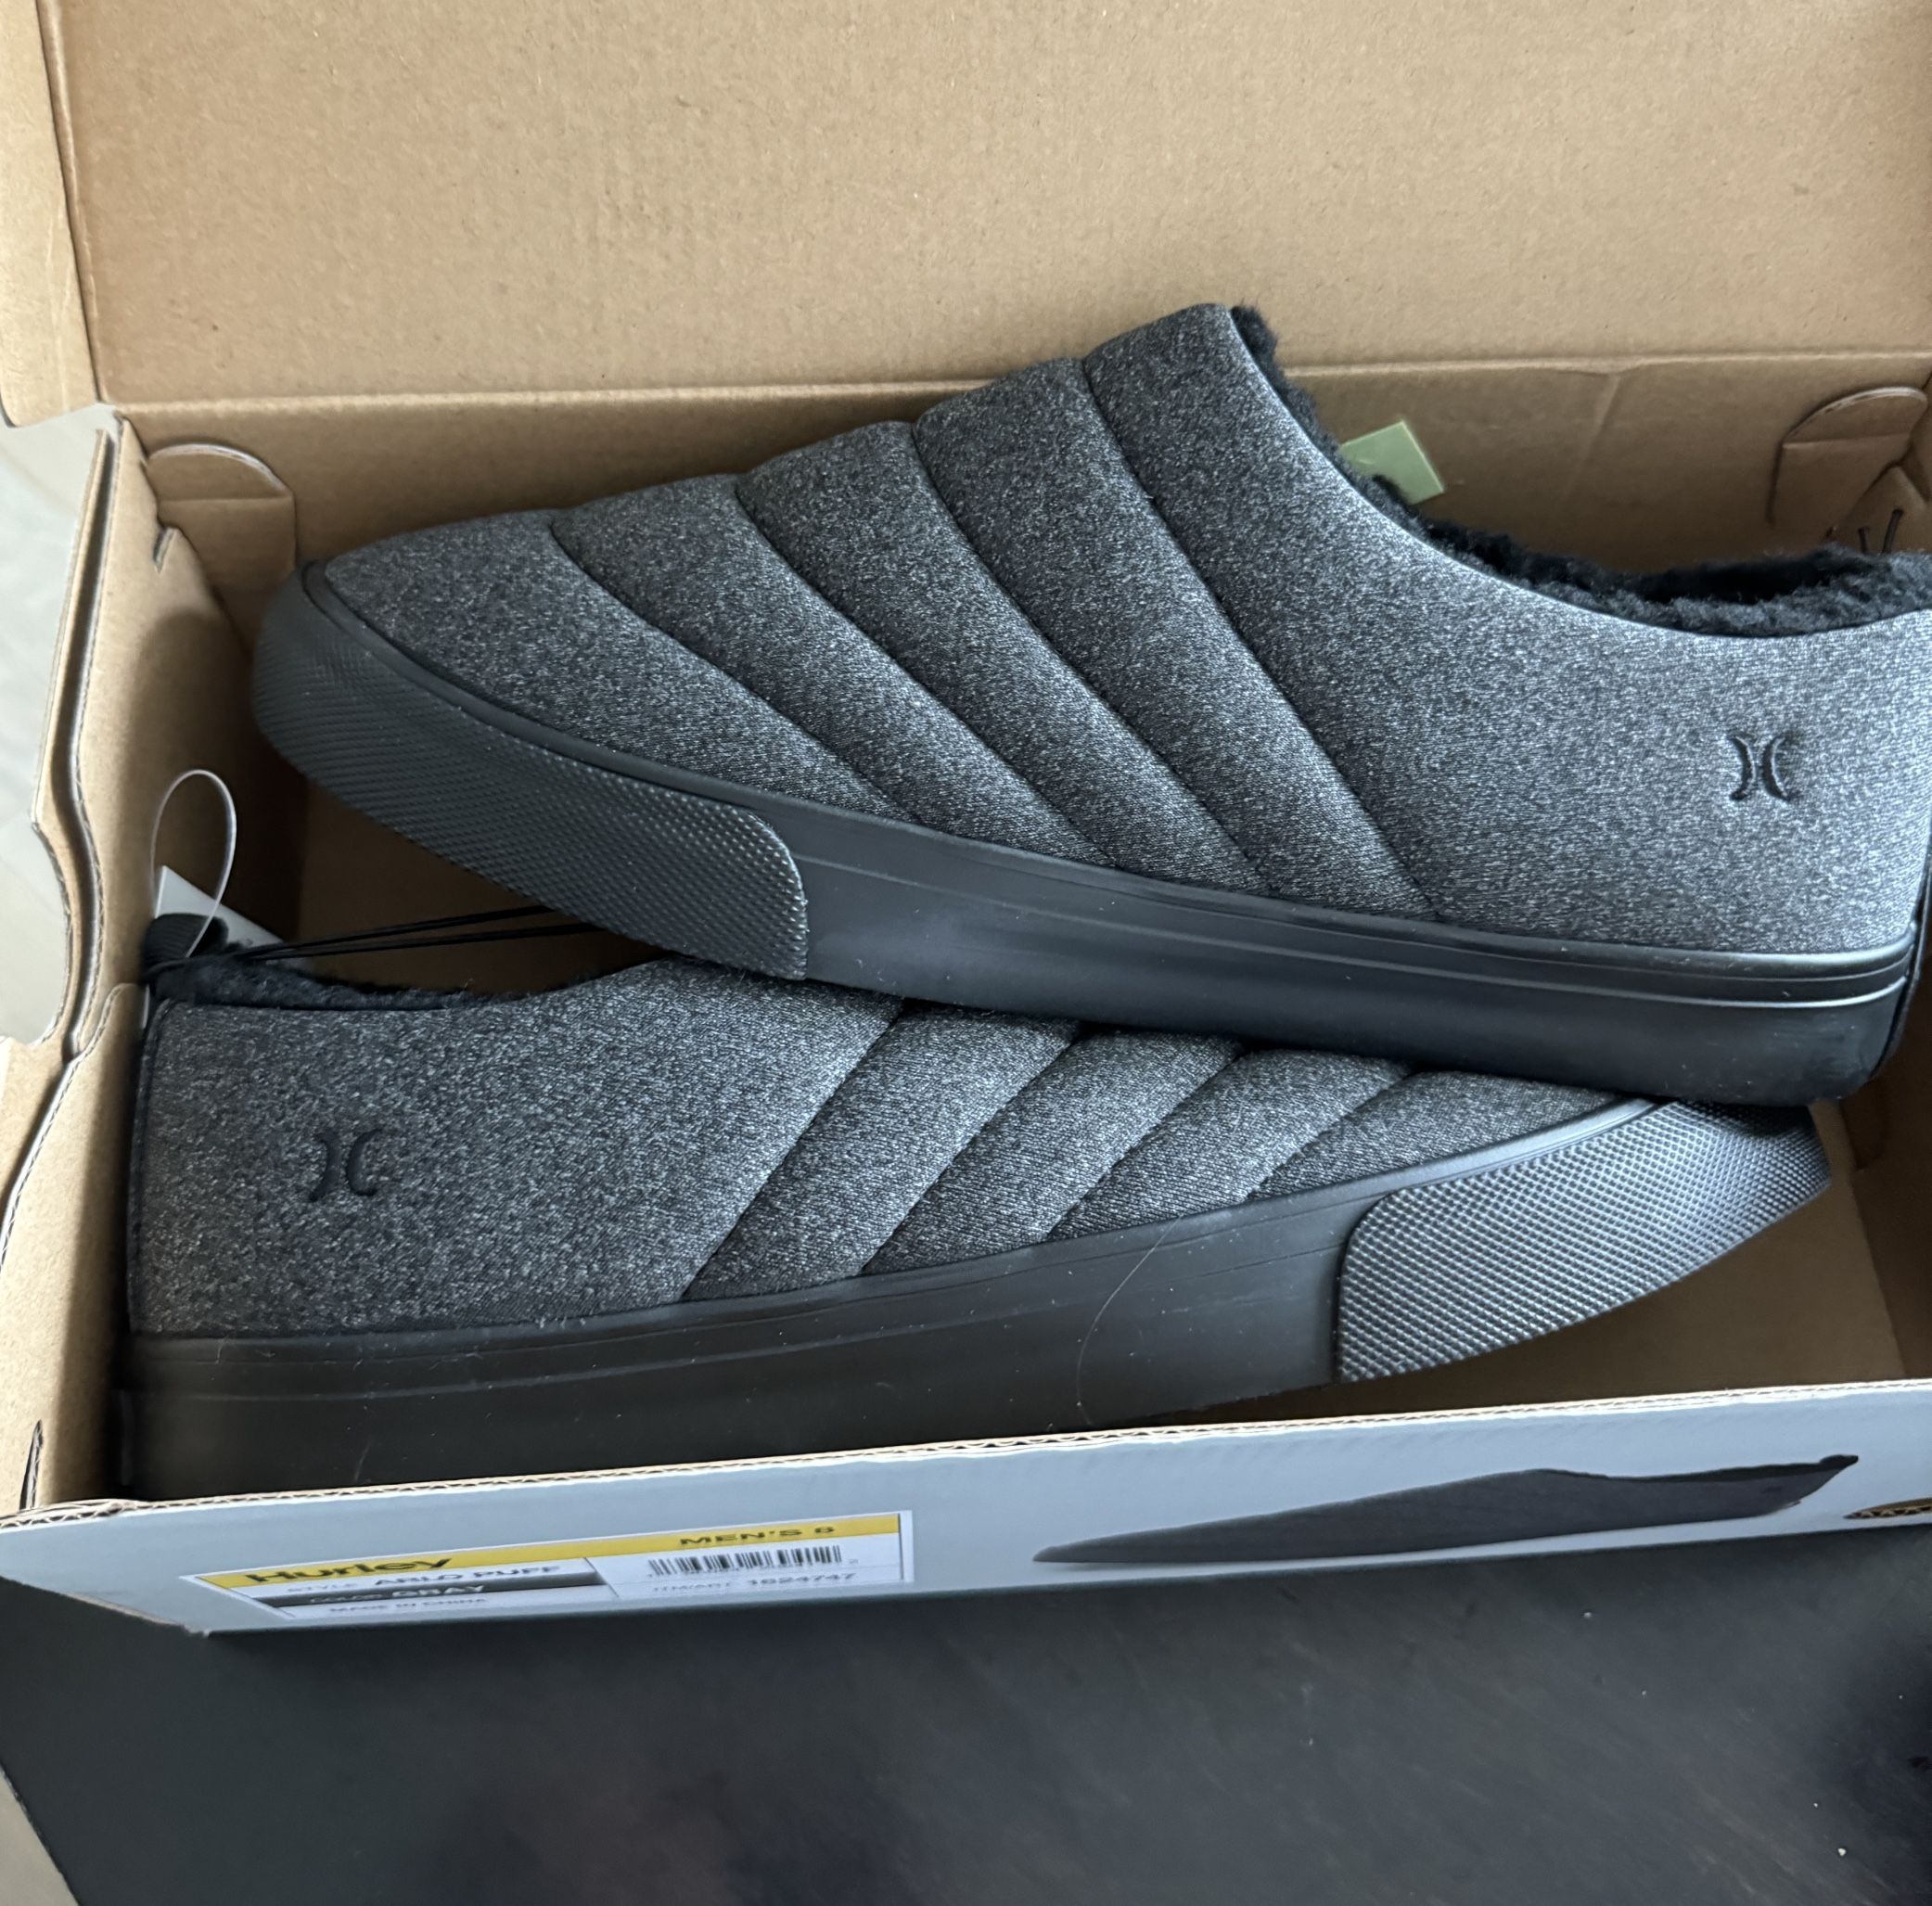 New Hurley Arlo Puff House Shoes- Beand new in box!  Color is gray.  